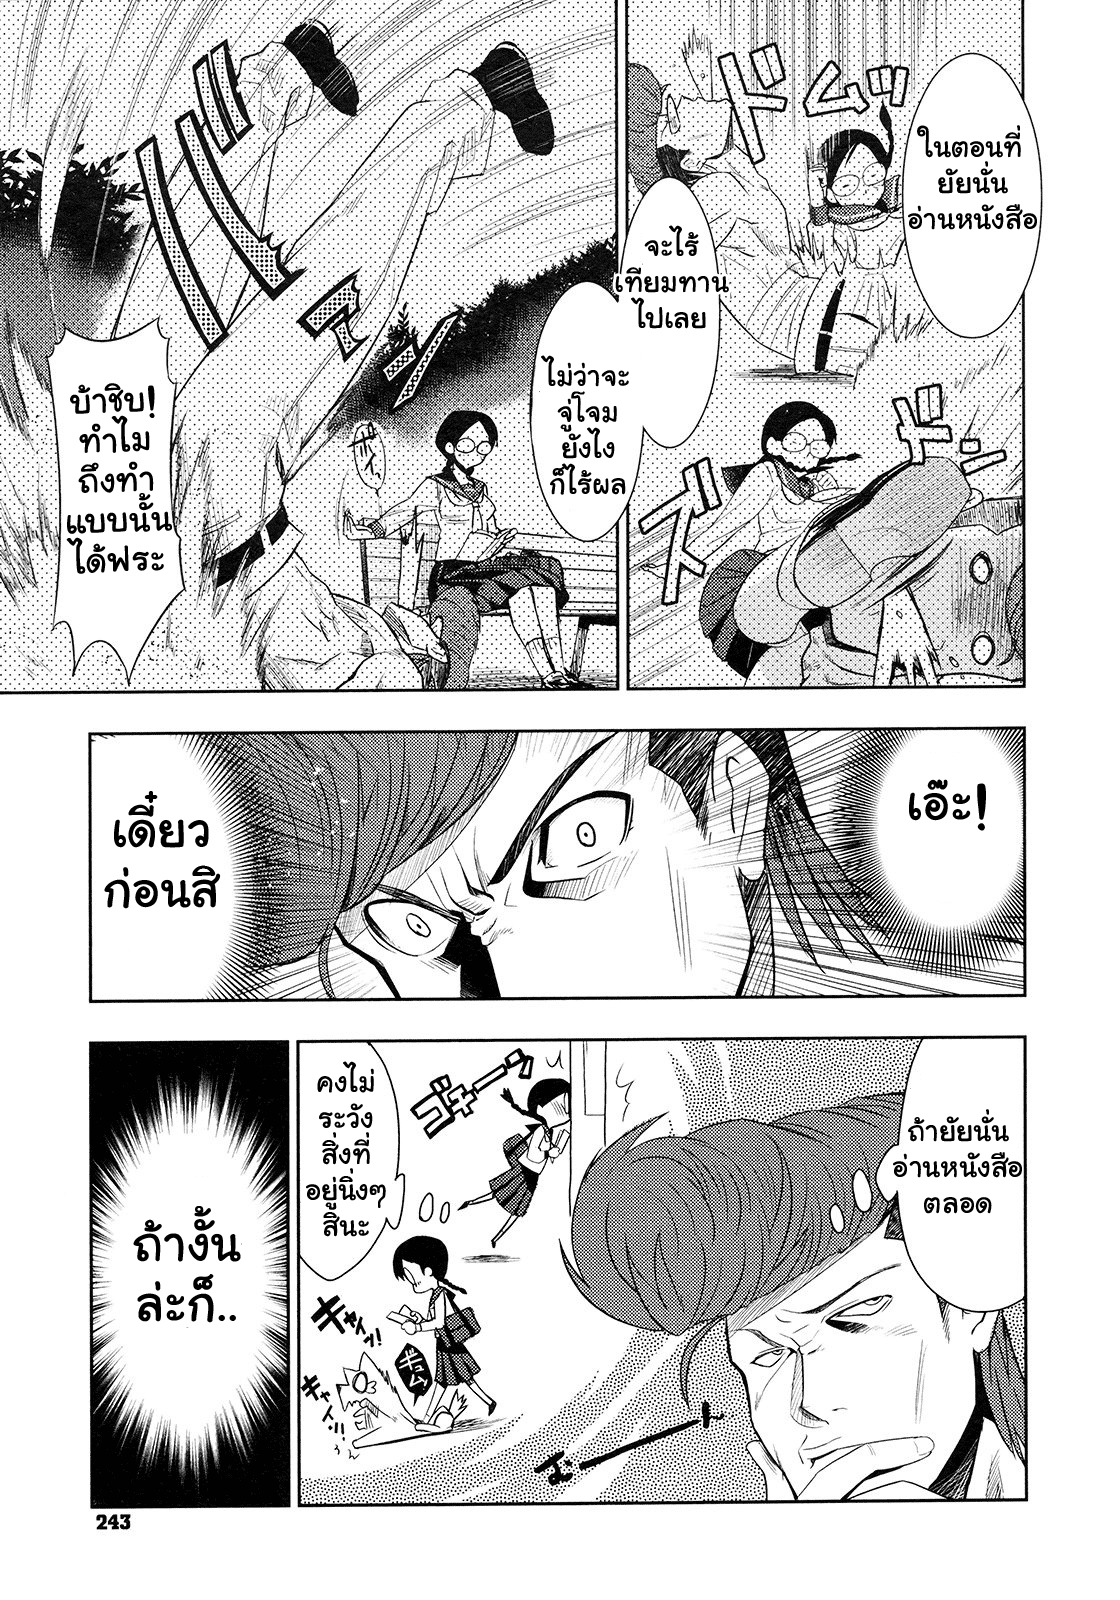 [Inue Shinsuke] The Strongest Man VS The King of Fighting [thai] 